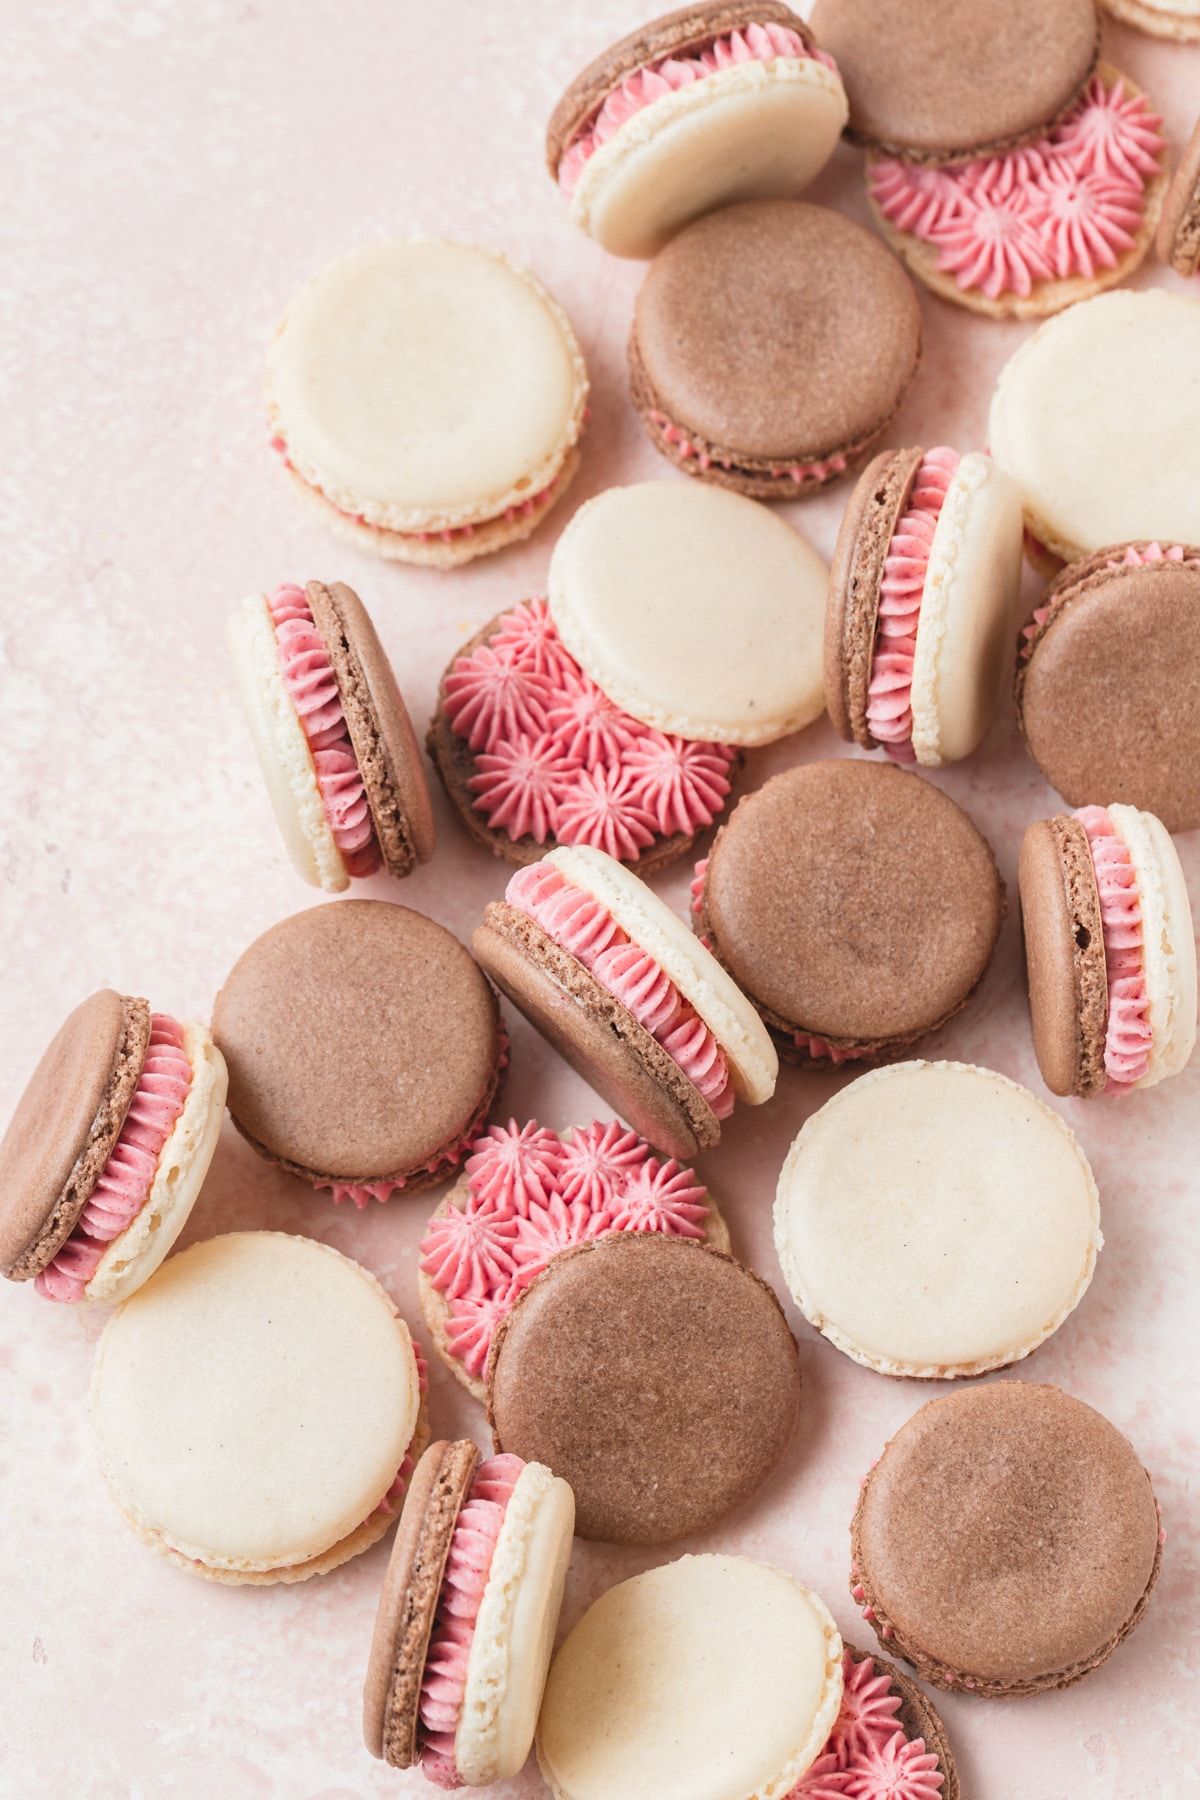 A plate of chocolate and vanilla macarons with pink frosting in the middle. - Macarons